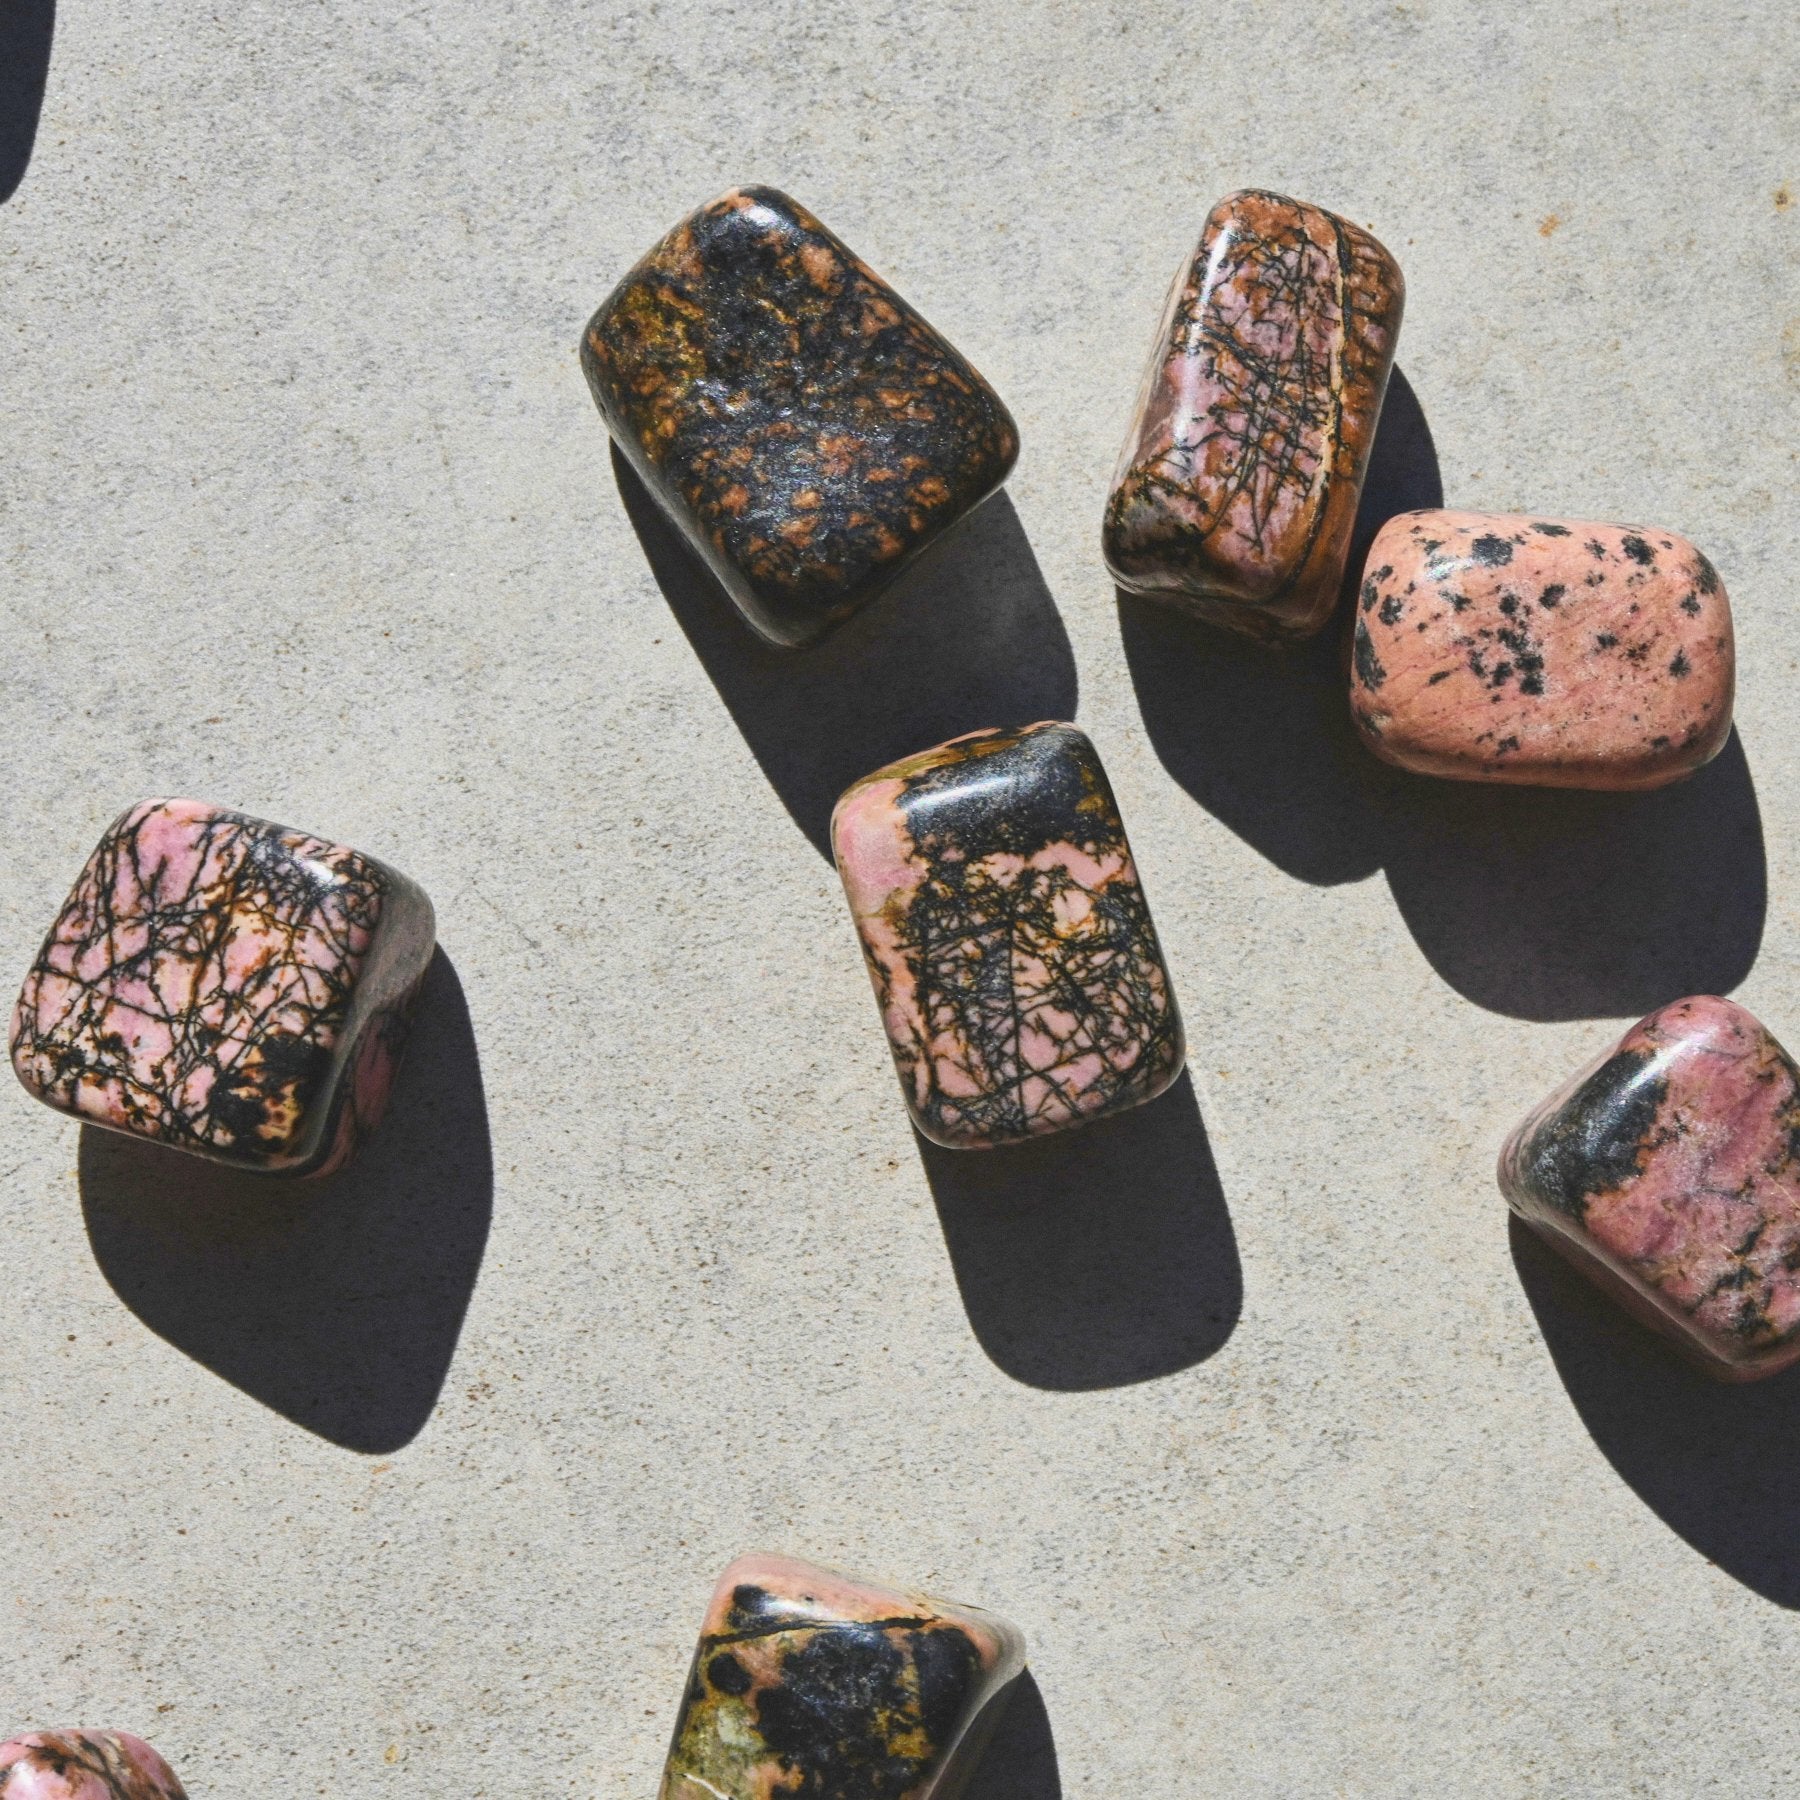 what is rhodonite good for